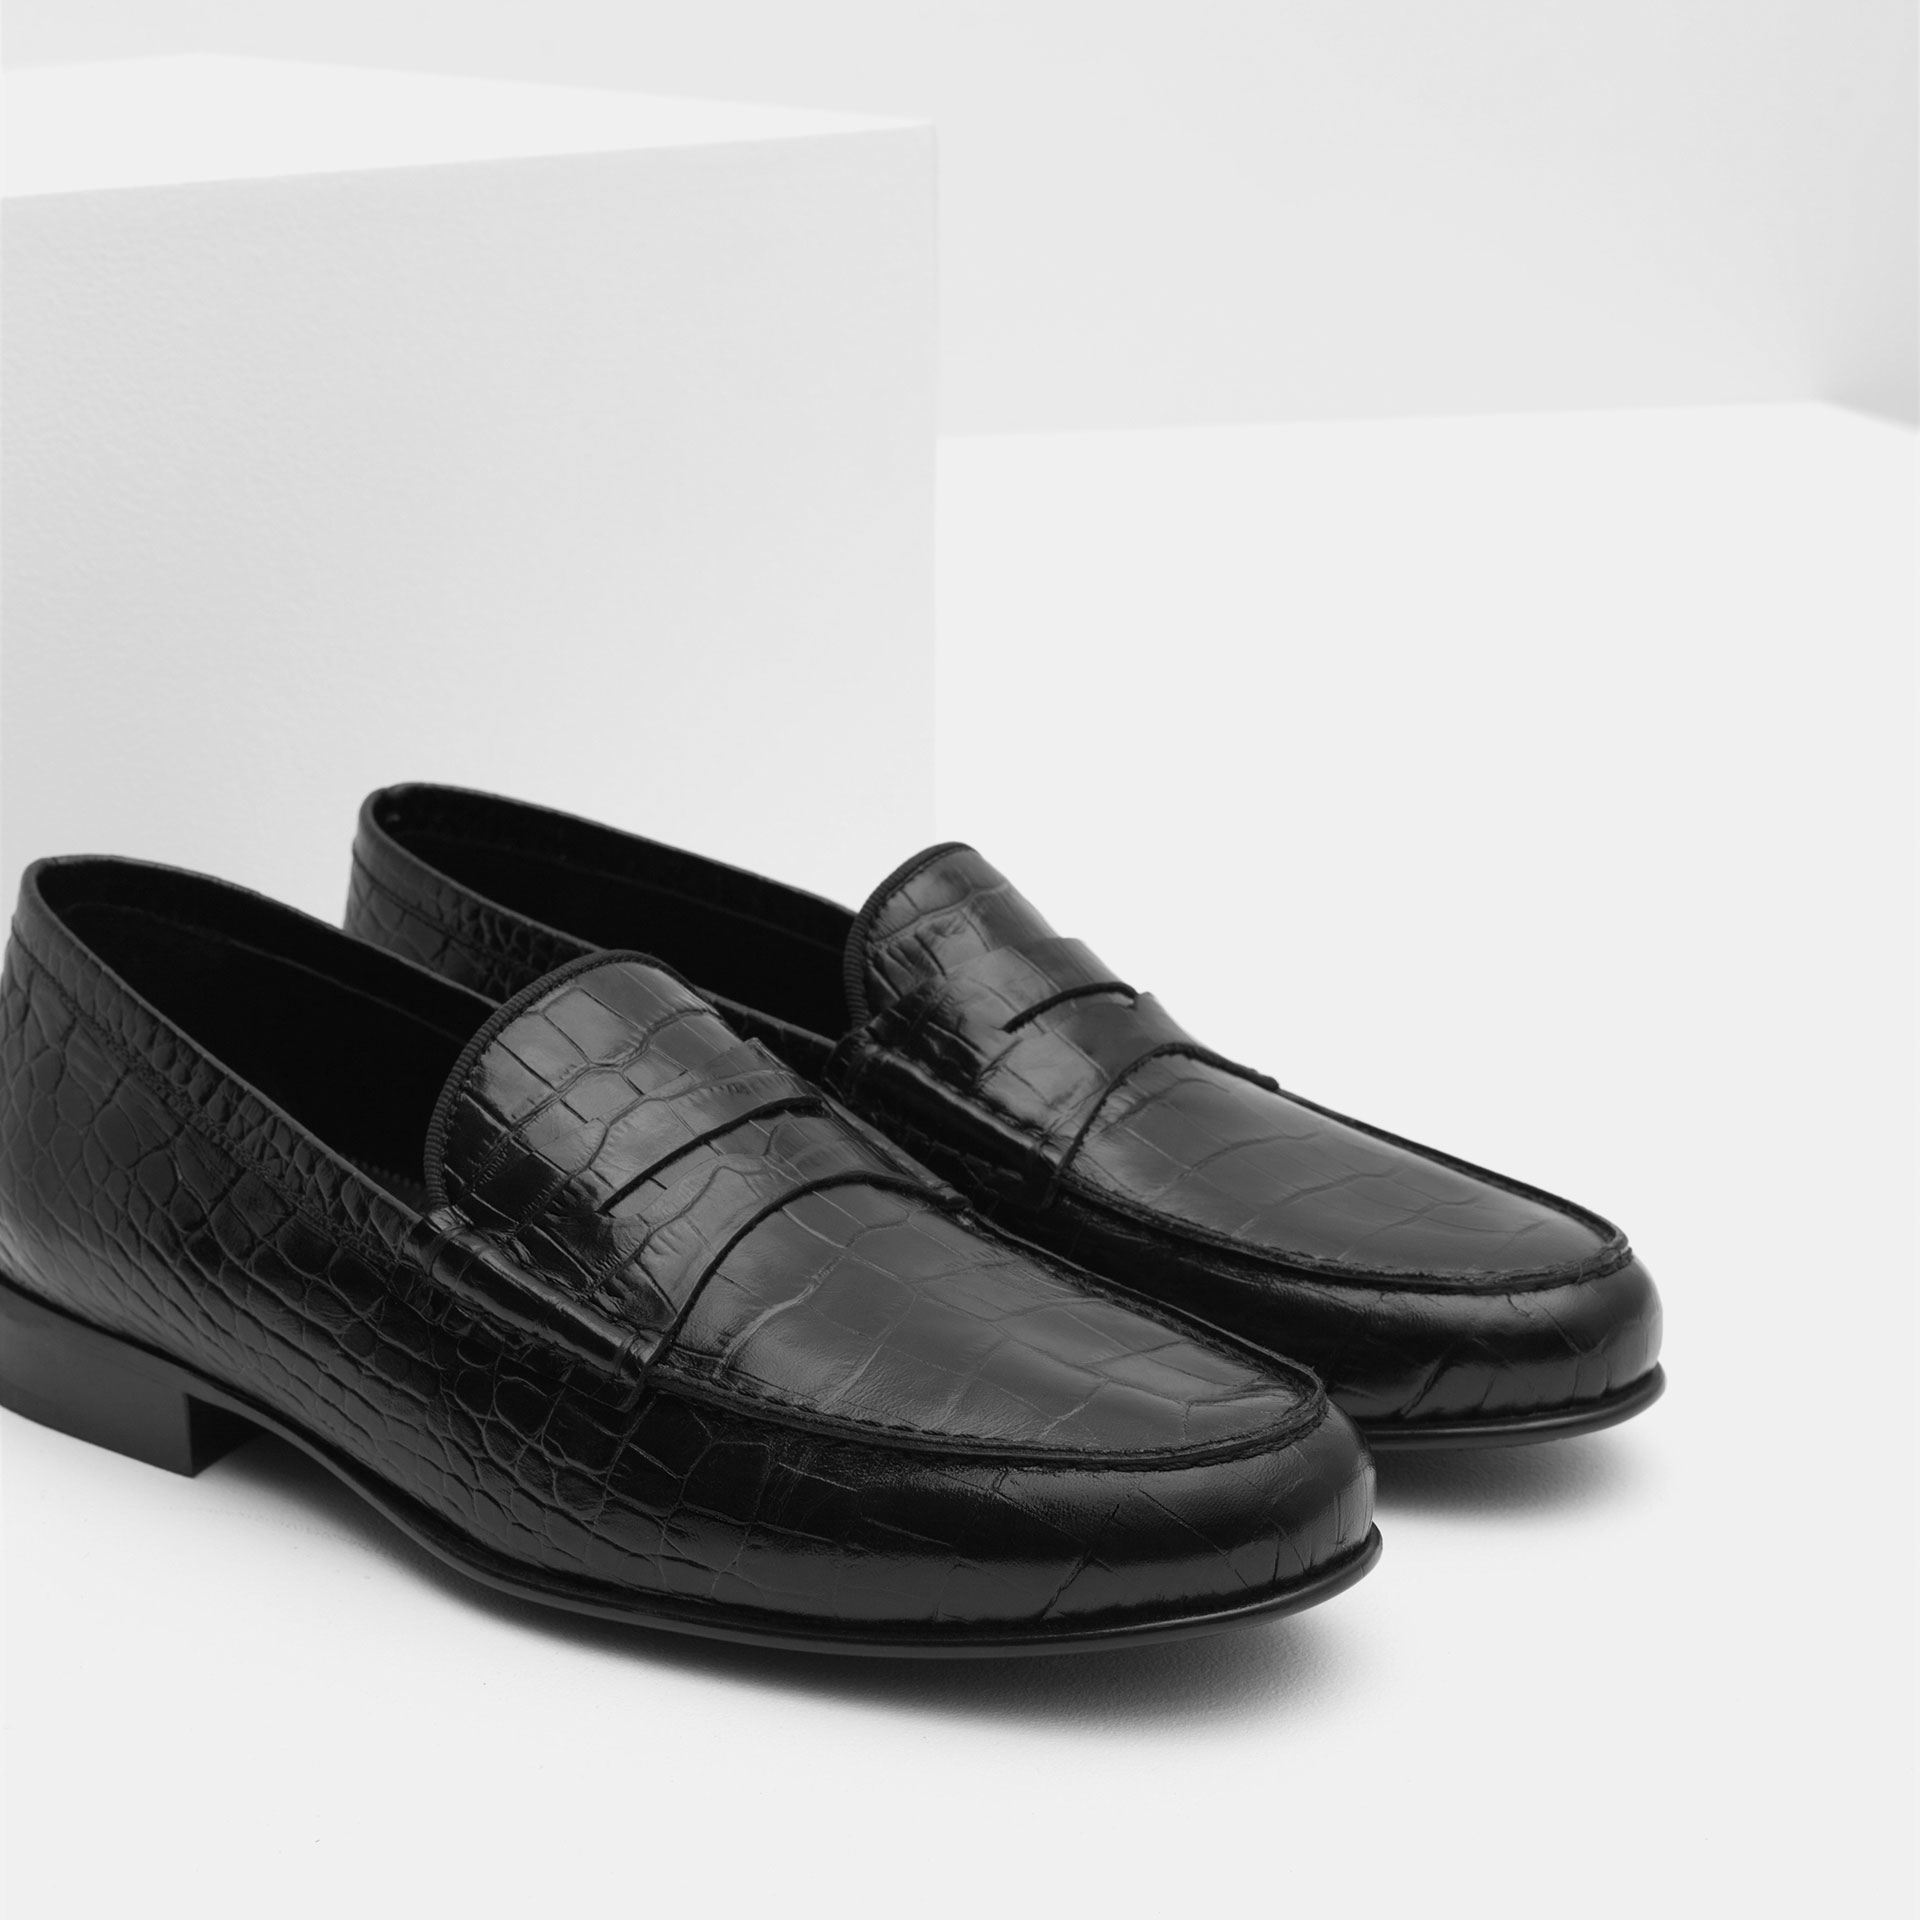  Zara  Reptile effect Leather Loafers  in Black for Men  Lyst